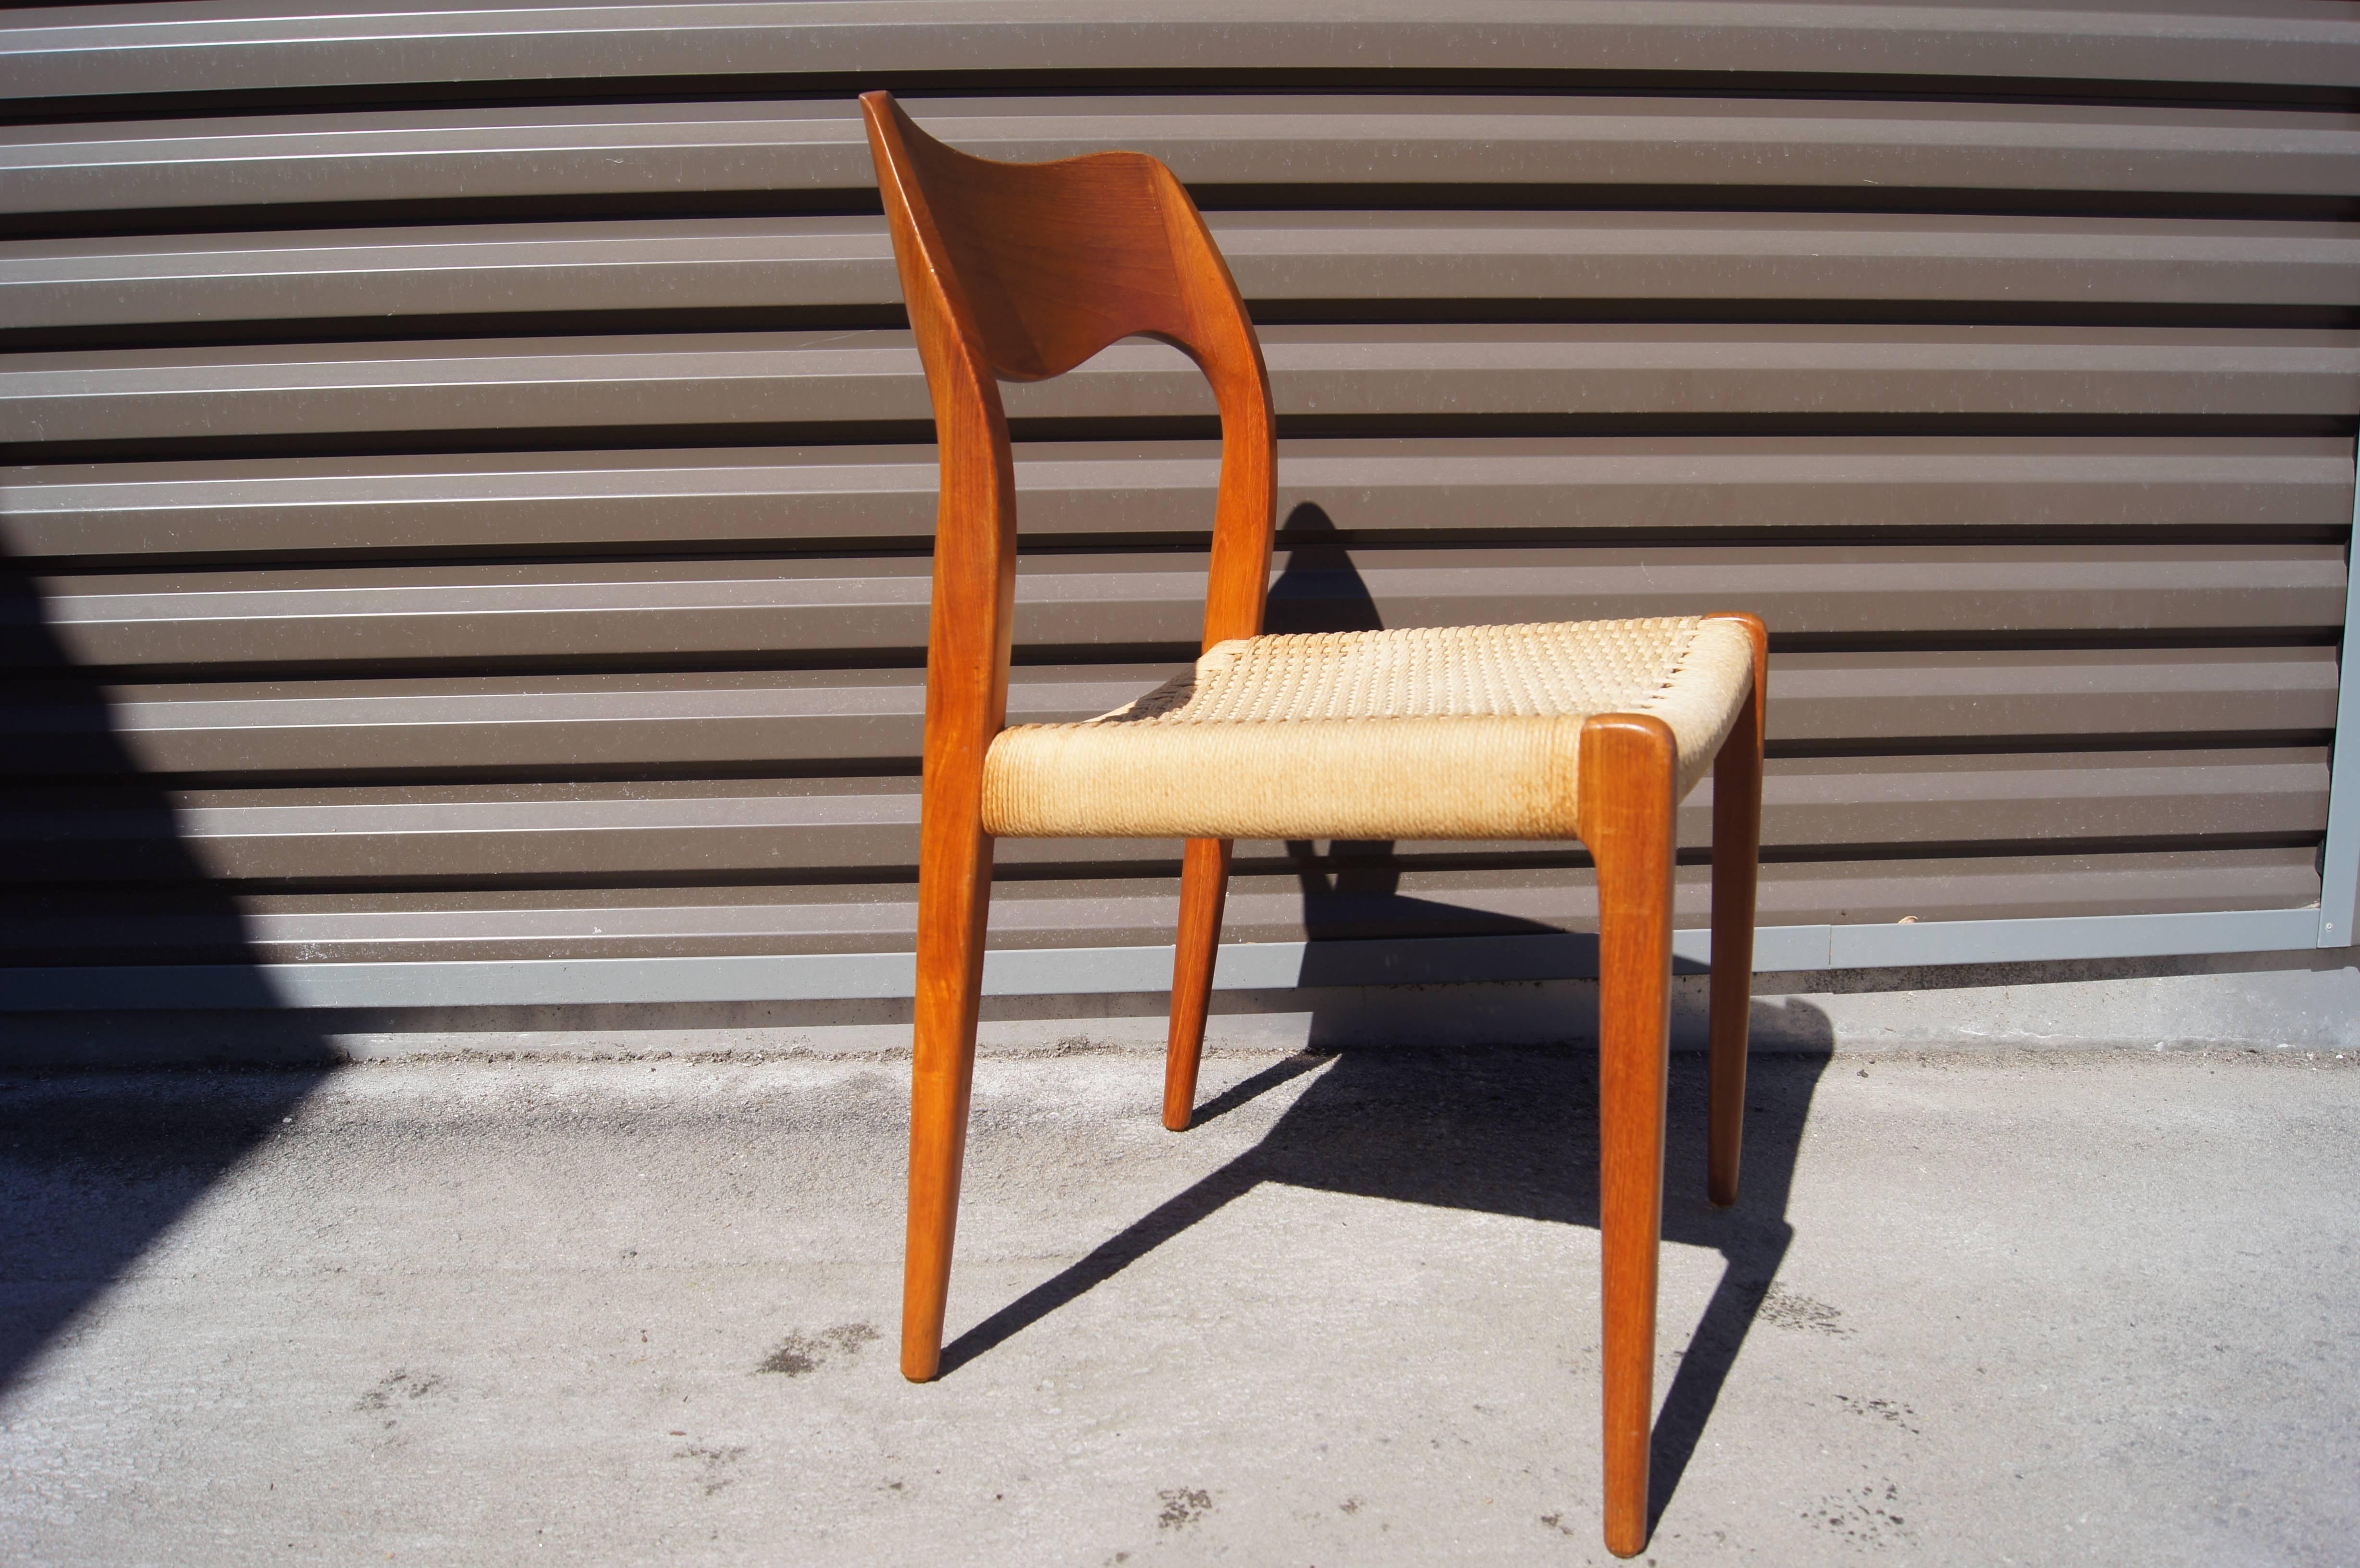 Designed in 1951 by Niels Otto Møller for J. L. Møllers Møbelfabrik, these Classic Danish dining chairs, model 71, feature graceful teak frames and
handwoven papercord seats.